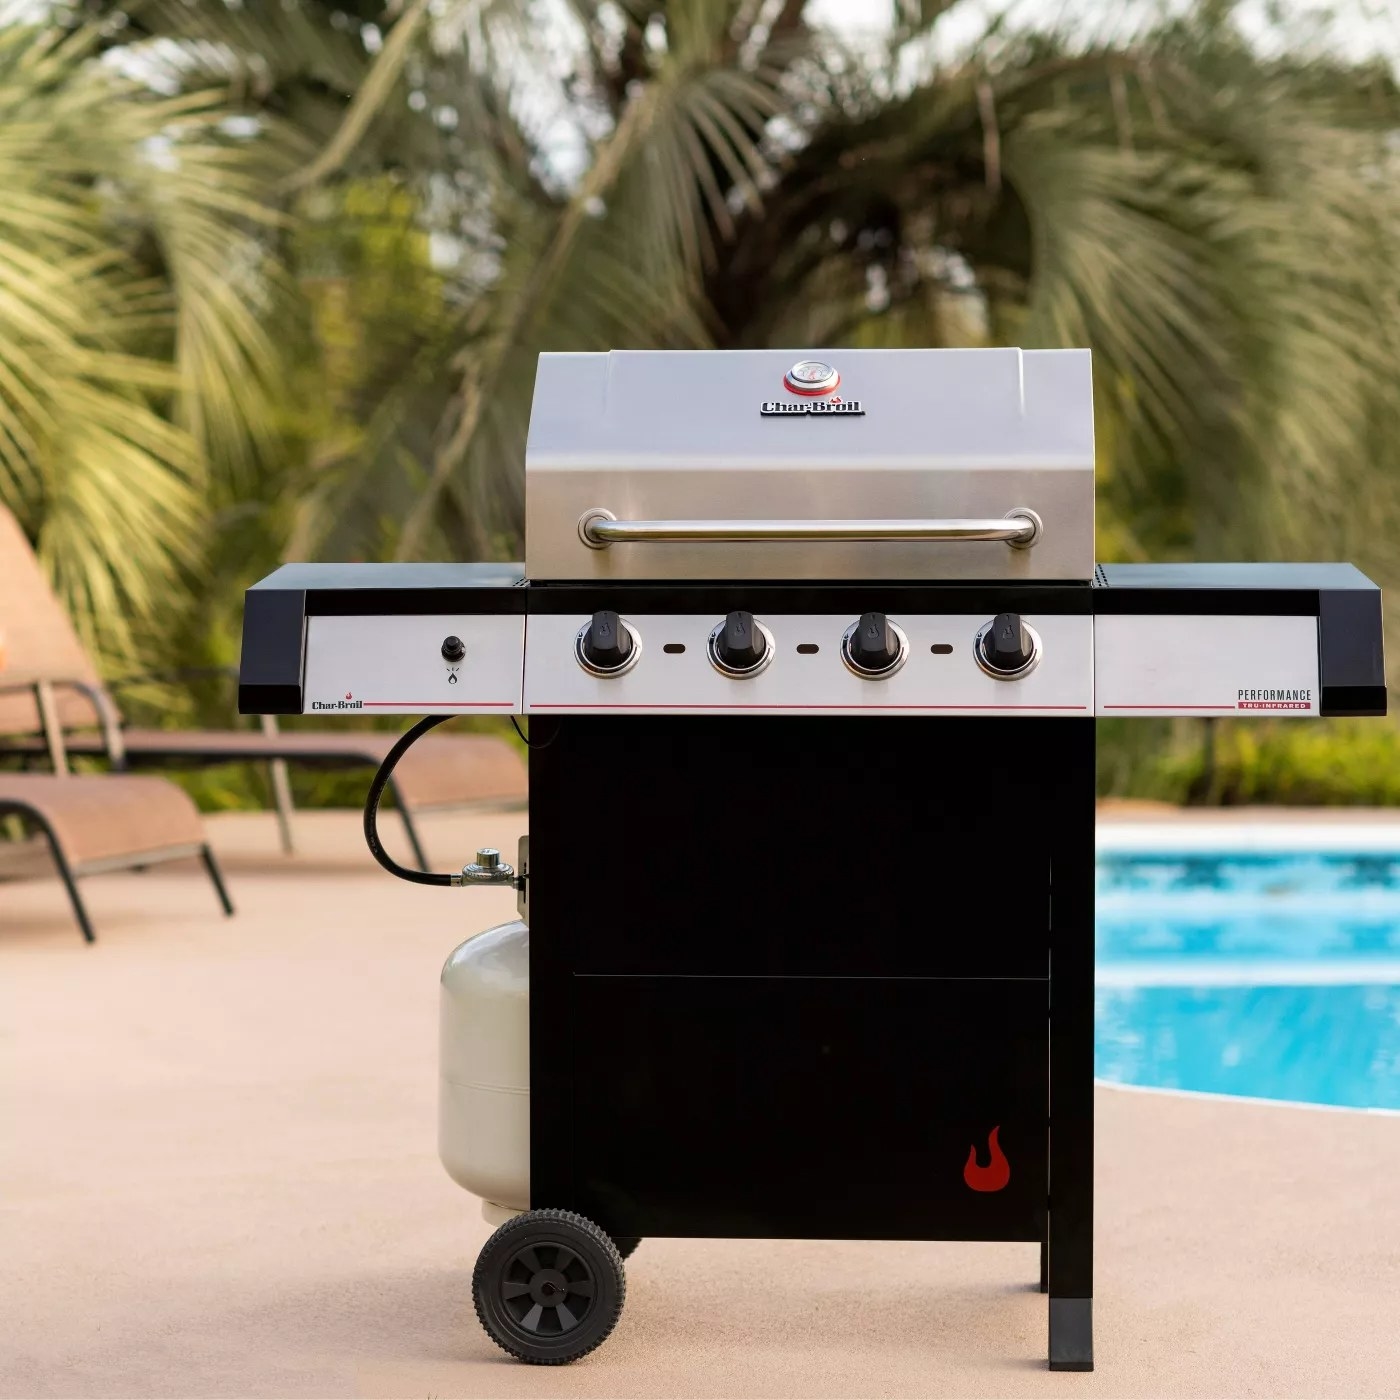 The Char-Broil grill